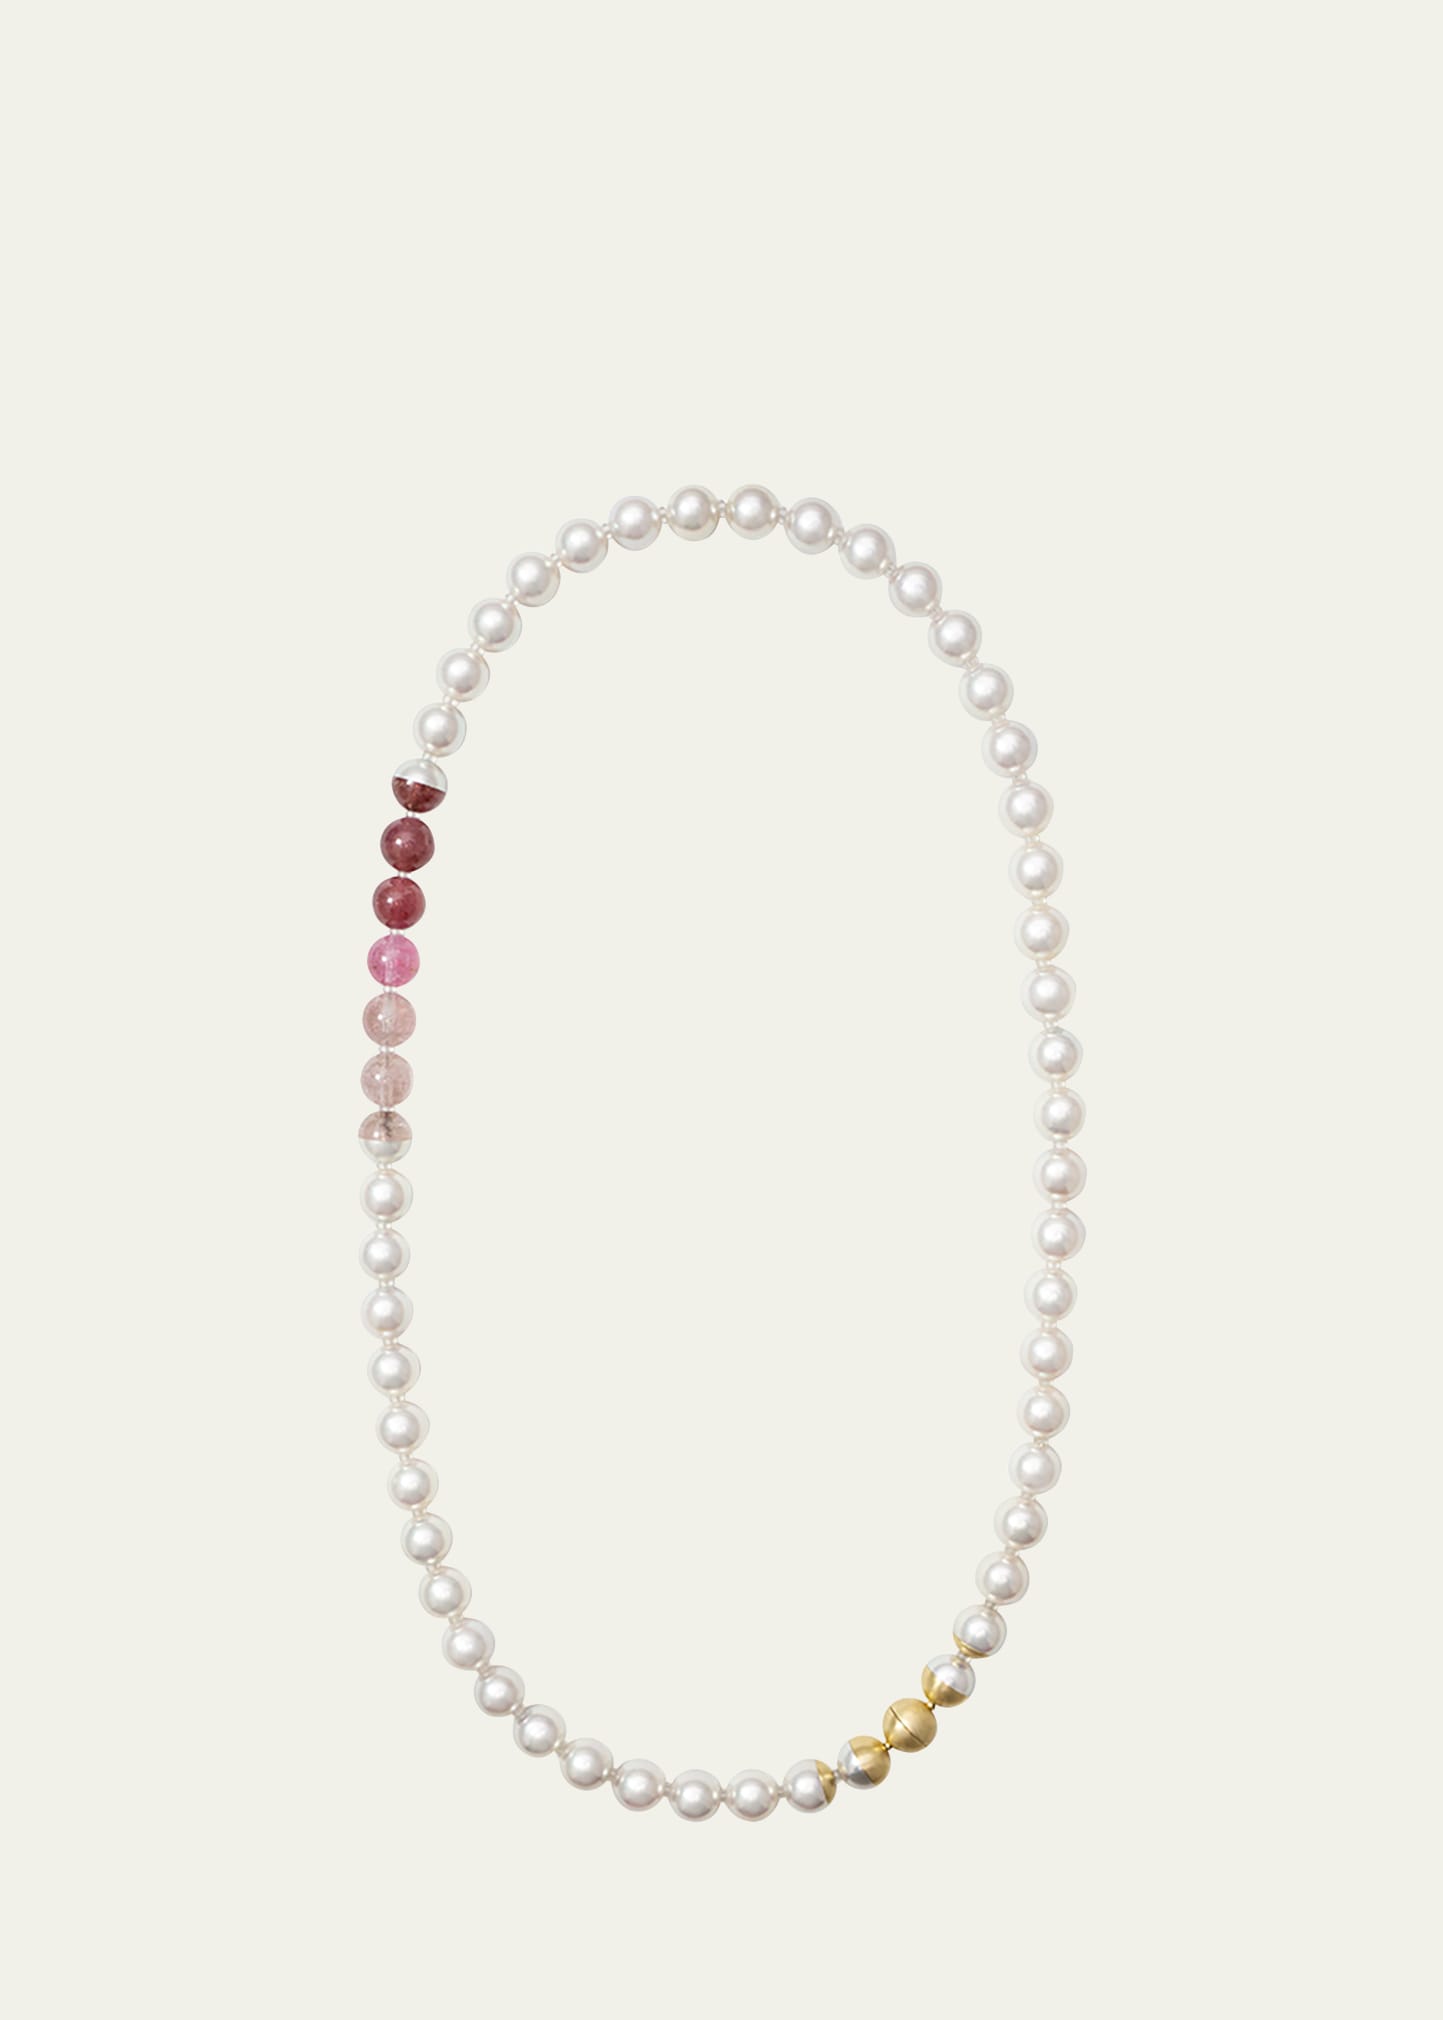 Yutai 18k Yellow Gold Sectional Pearl Necklace With Tourmaline And Cultured Akoya Pearls In Pink Tourmaline